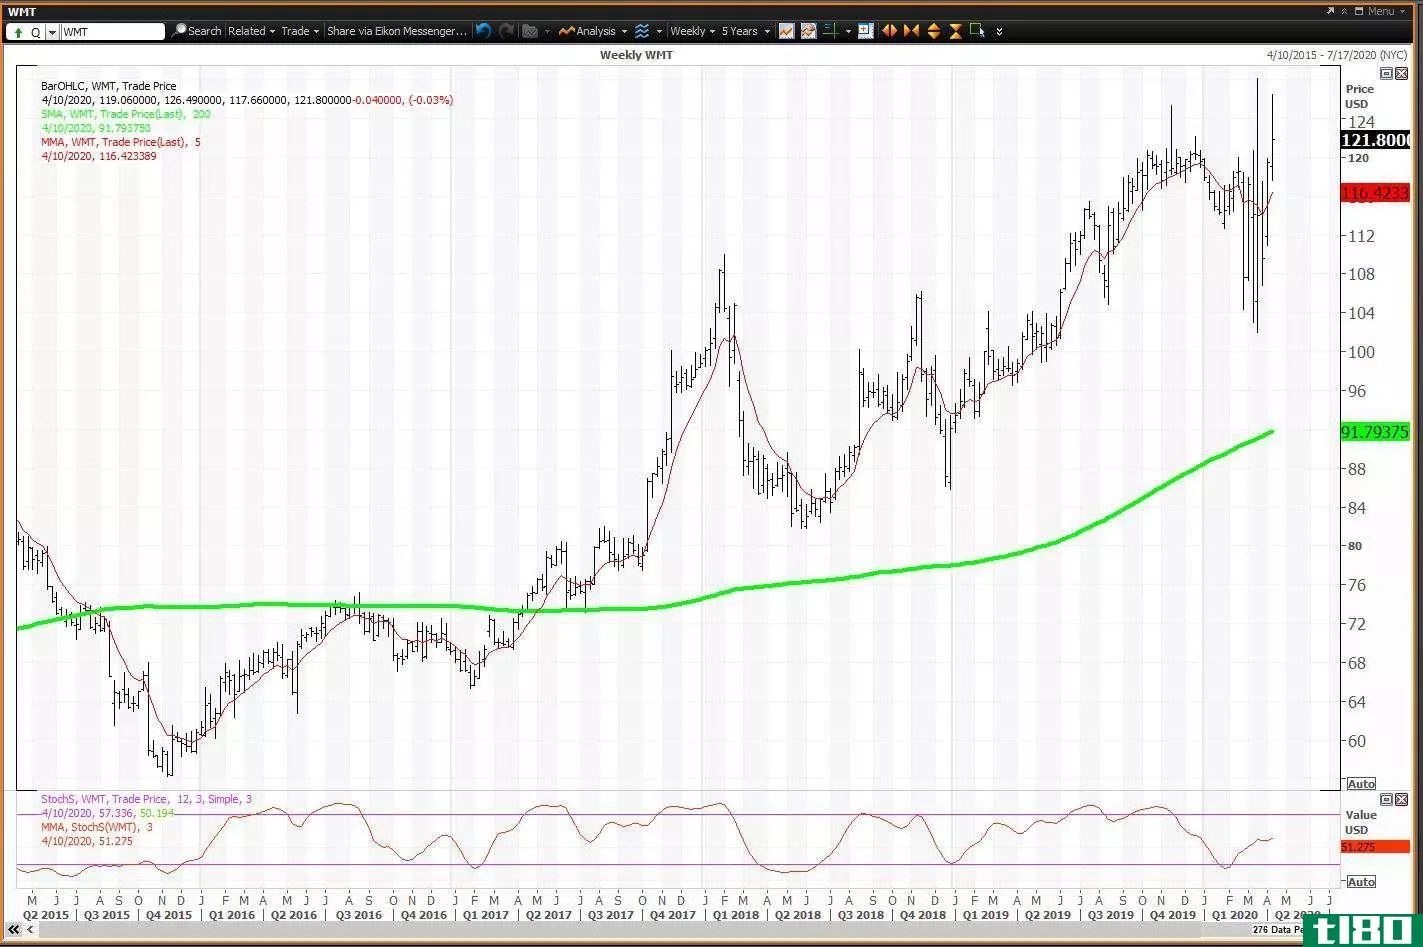 Weekly chart showing the share price performance of Walmart Inc. (WMT)